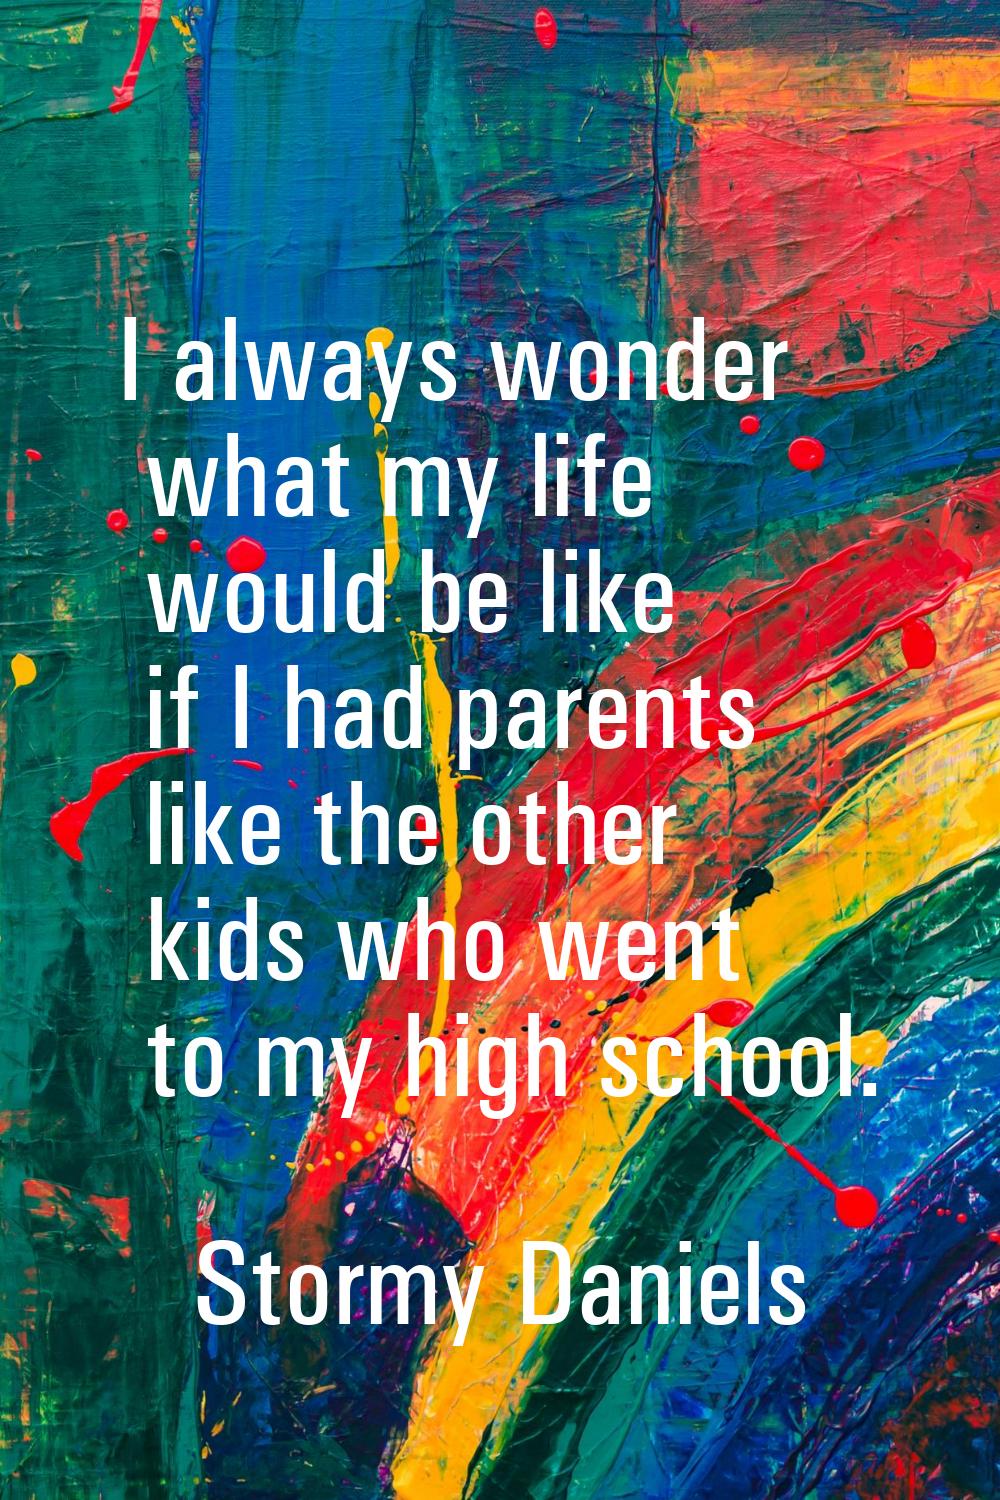 I always wonder what my life would be like if I had parents like the other kids who went to my high